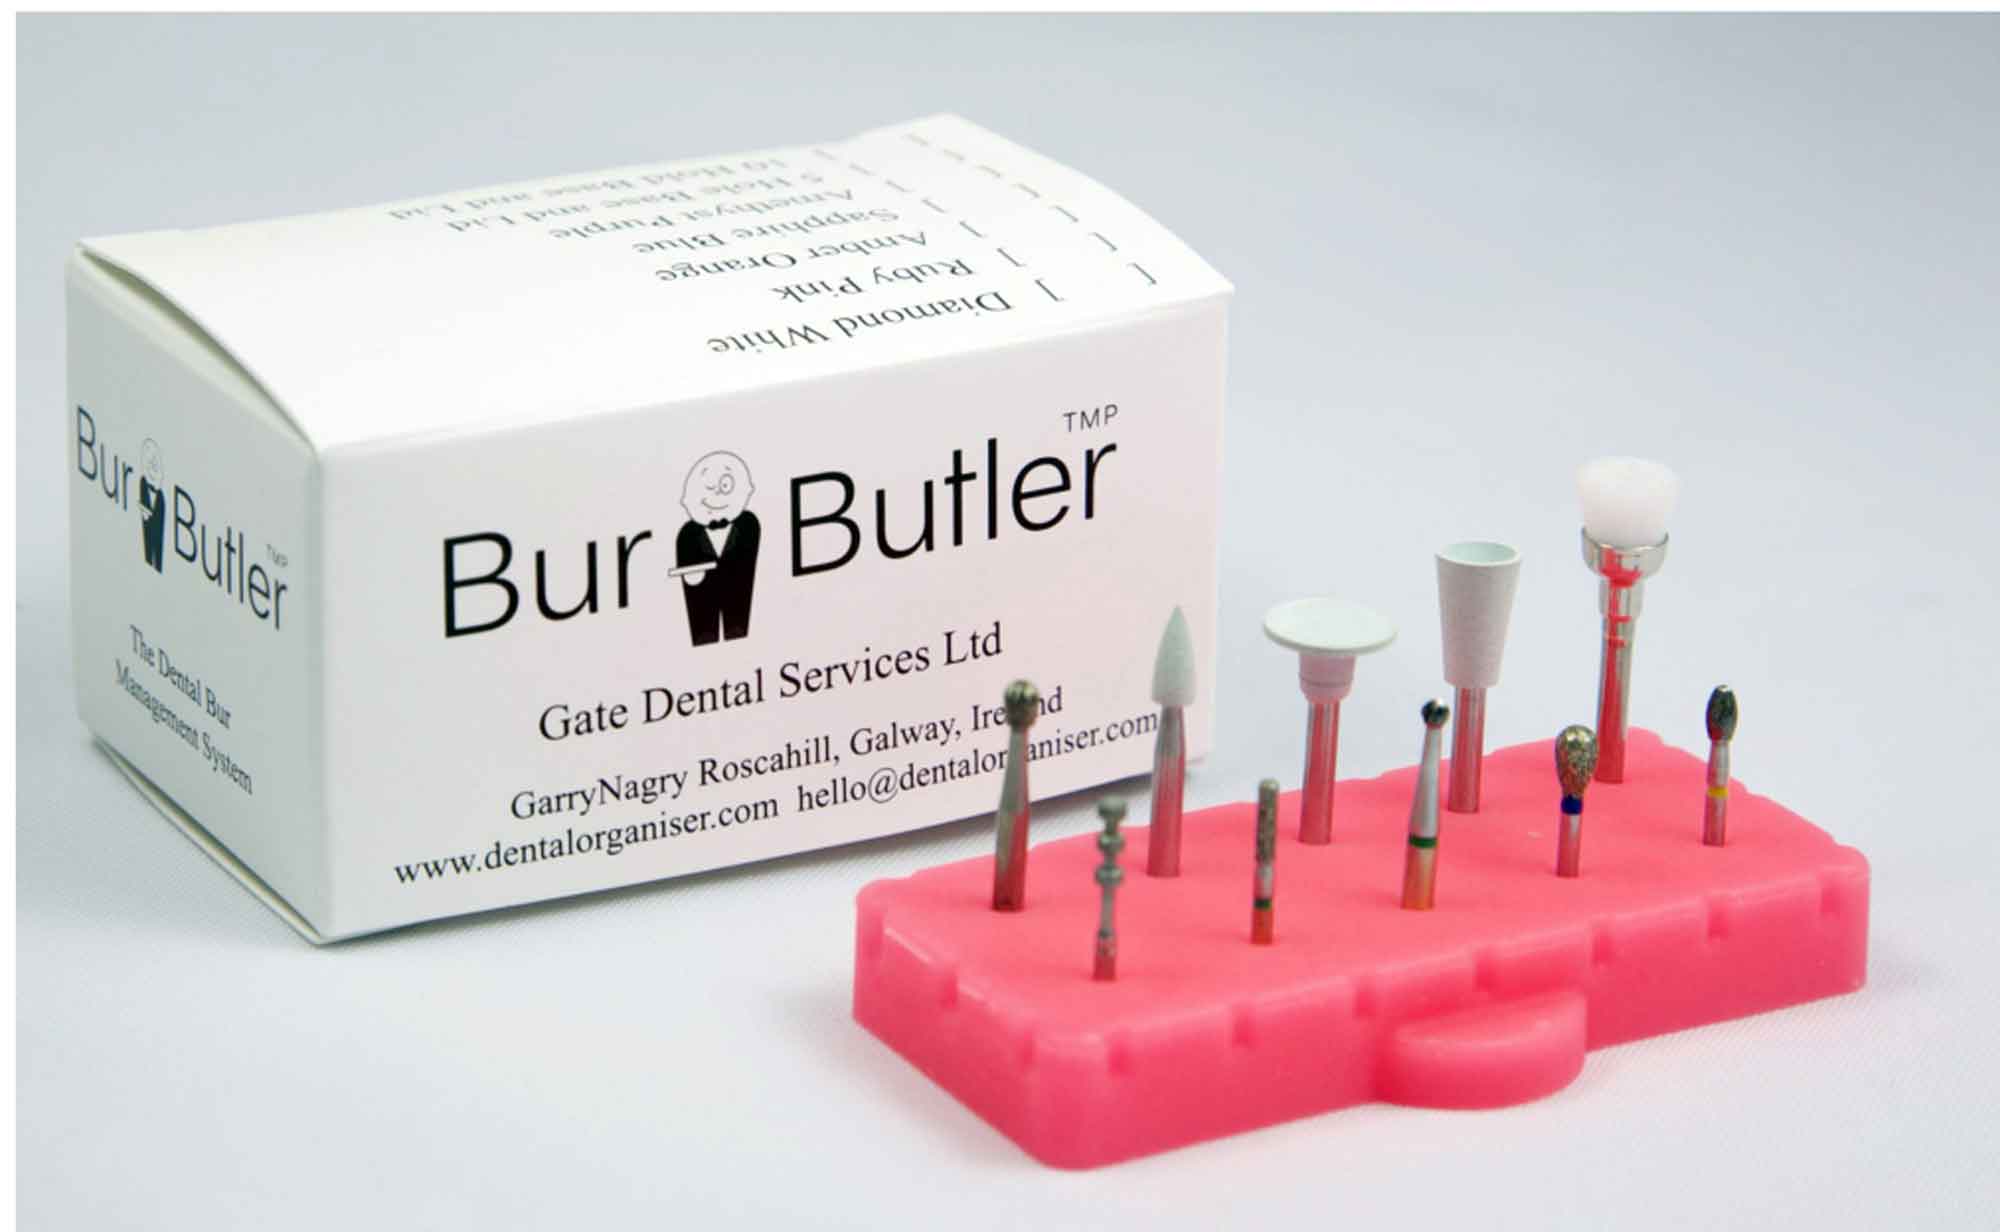 The Burbutler aids bur management from chairside by keeping all of your burs in one place